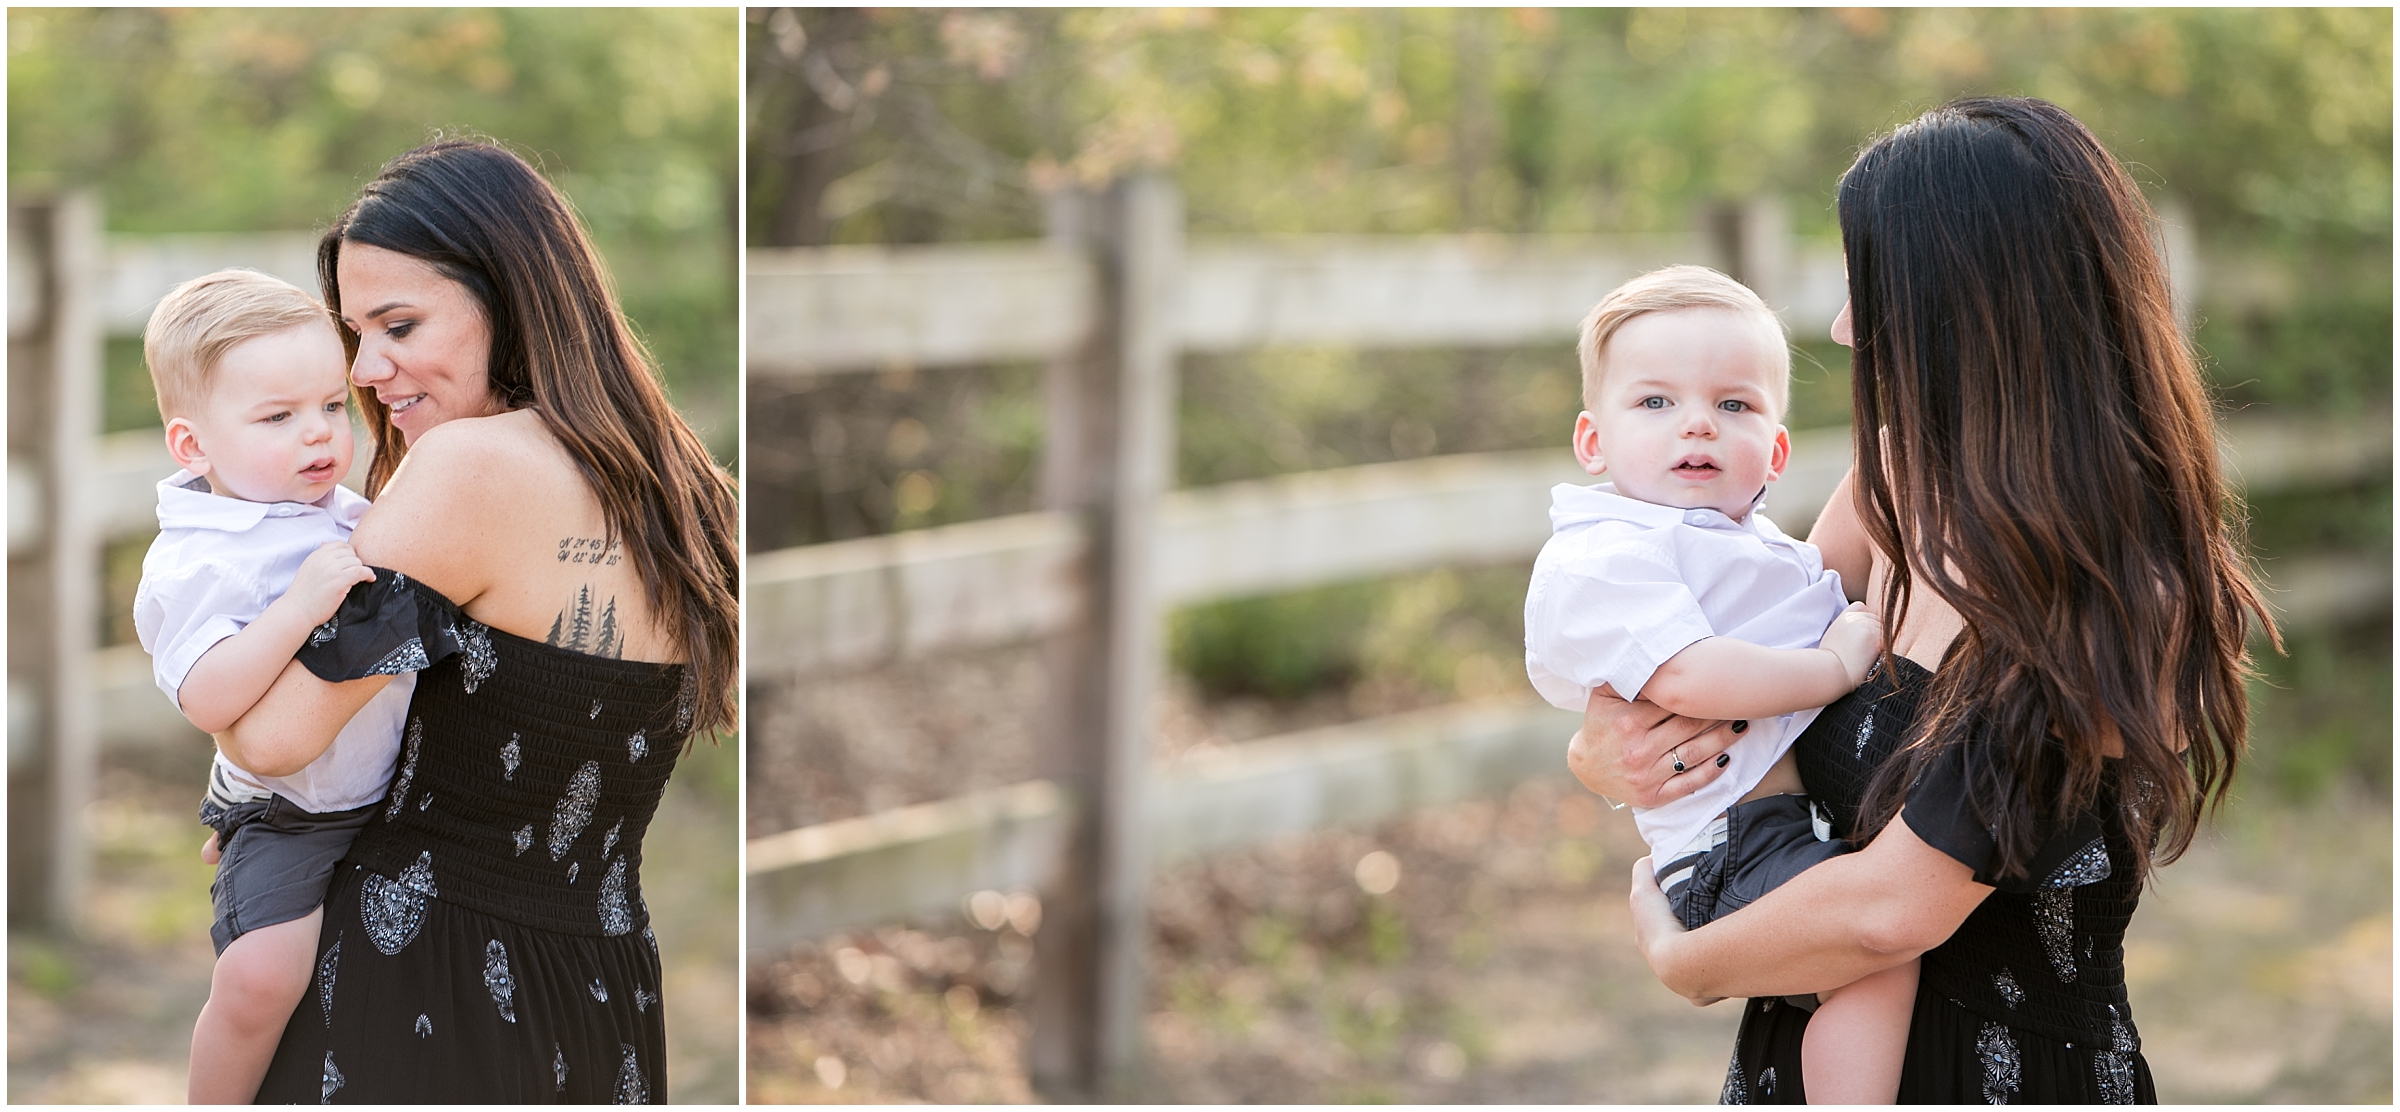 South Jersey Family Photographer - Boundary Creek Family Session